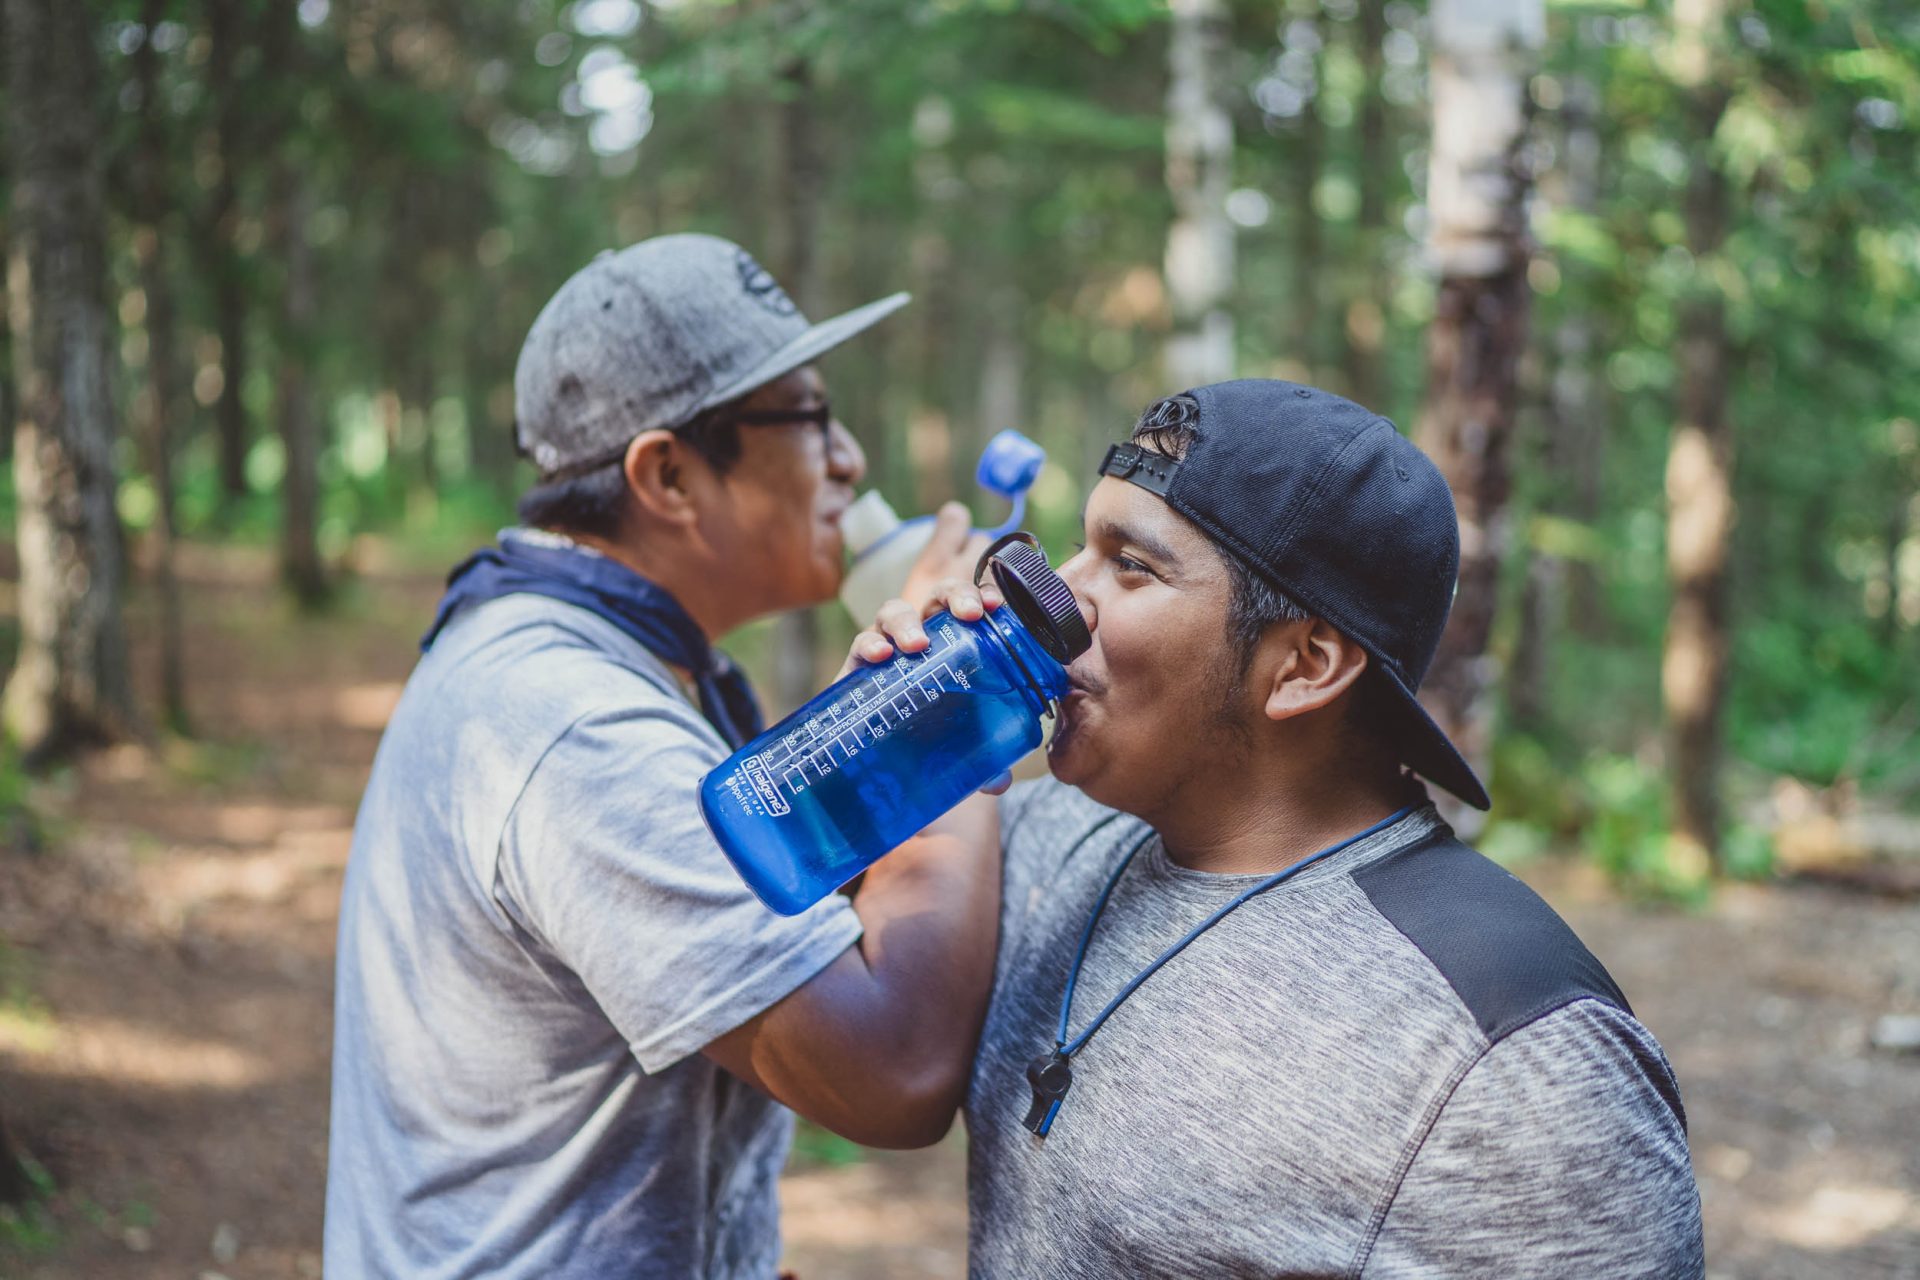 stay hydrated on your outdoor adventure